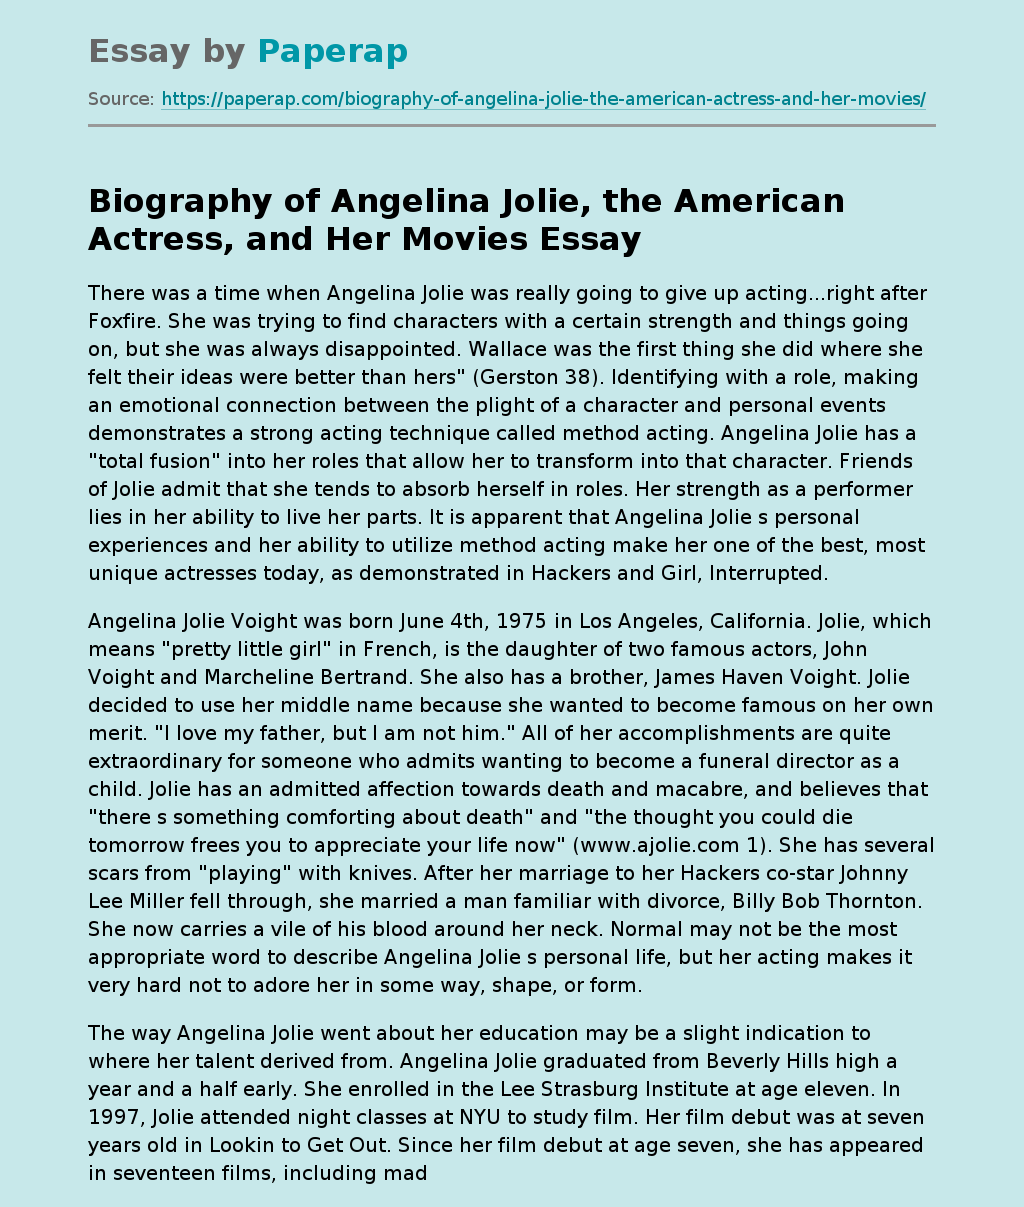 Biography of Angelina Jolie, the American Actress, and Her Movies